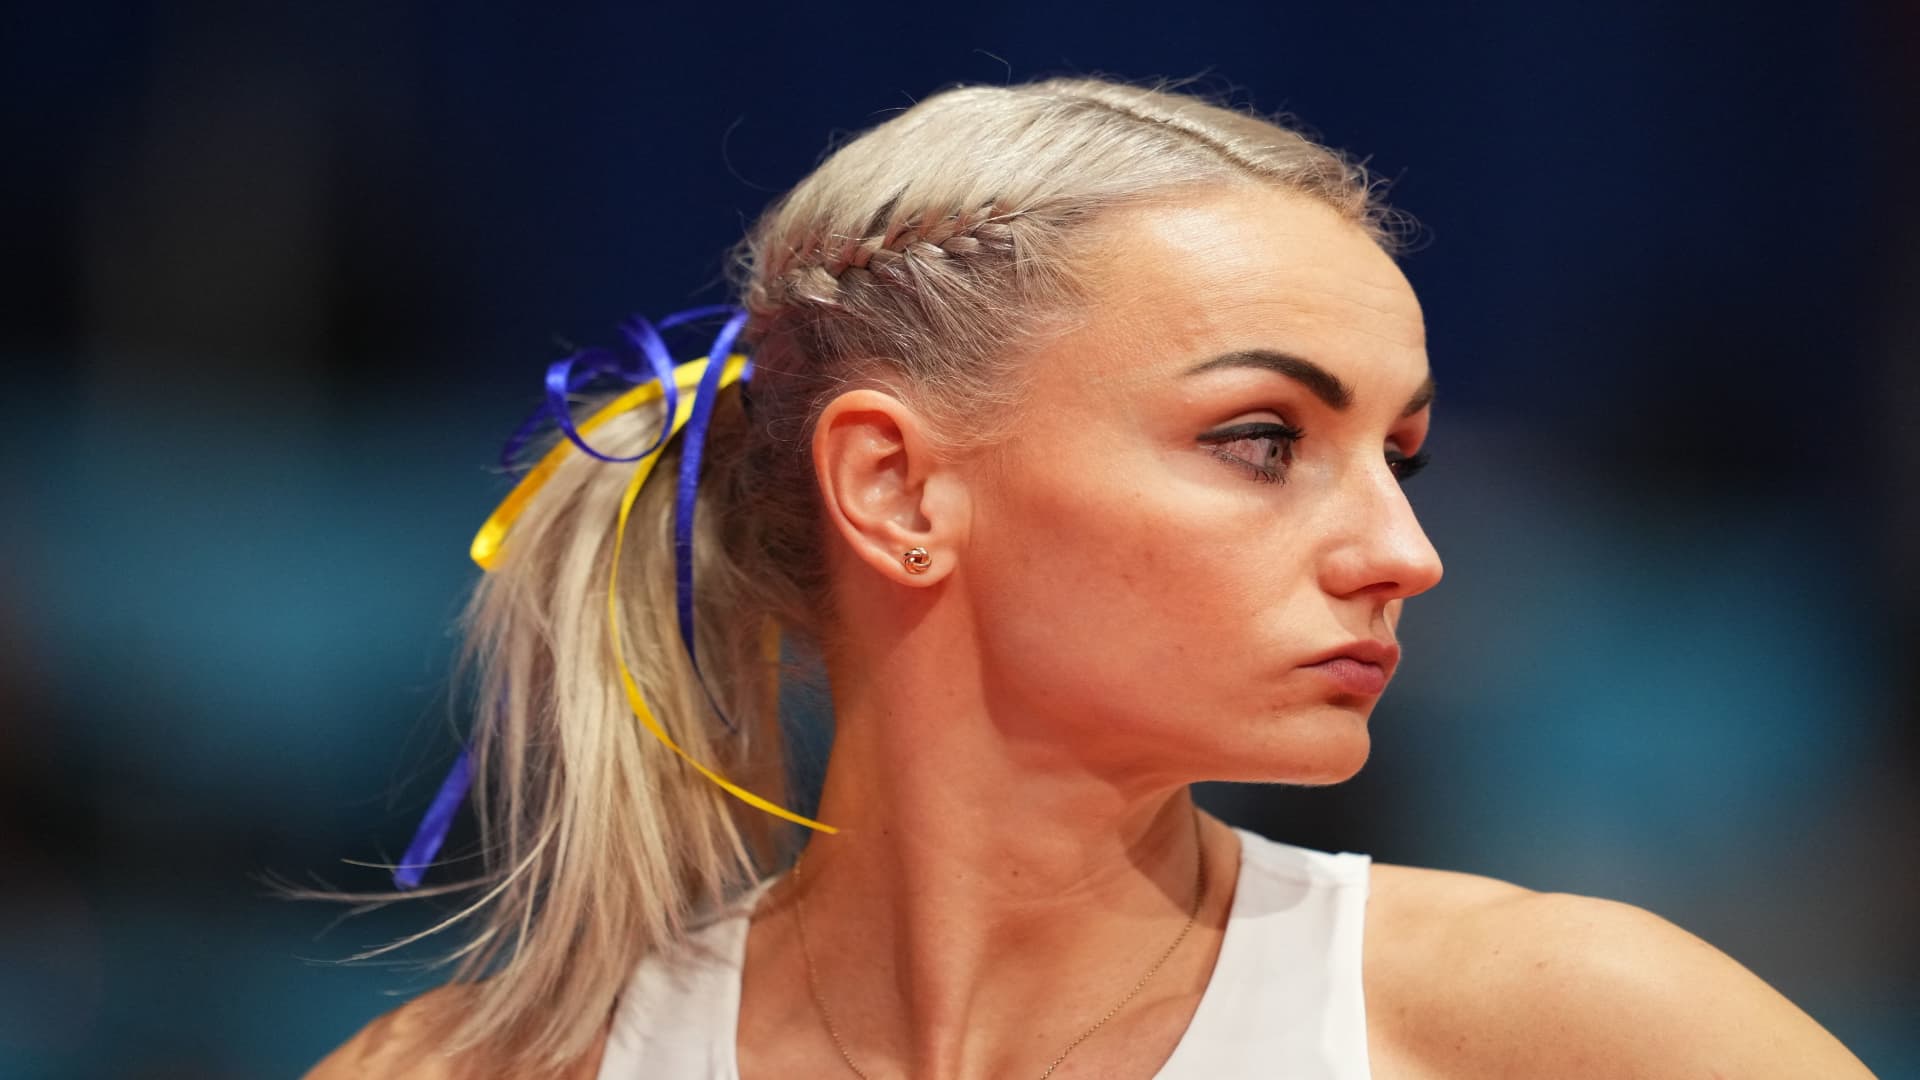 Poland´s Justyna Swiety-Ersetic before the women's 400m heat 1 wearing the Ukrainian colors in the ribbon of her hair in support of Ukraine amid Russia's invasion in Ukraine 